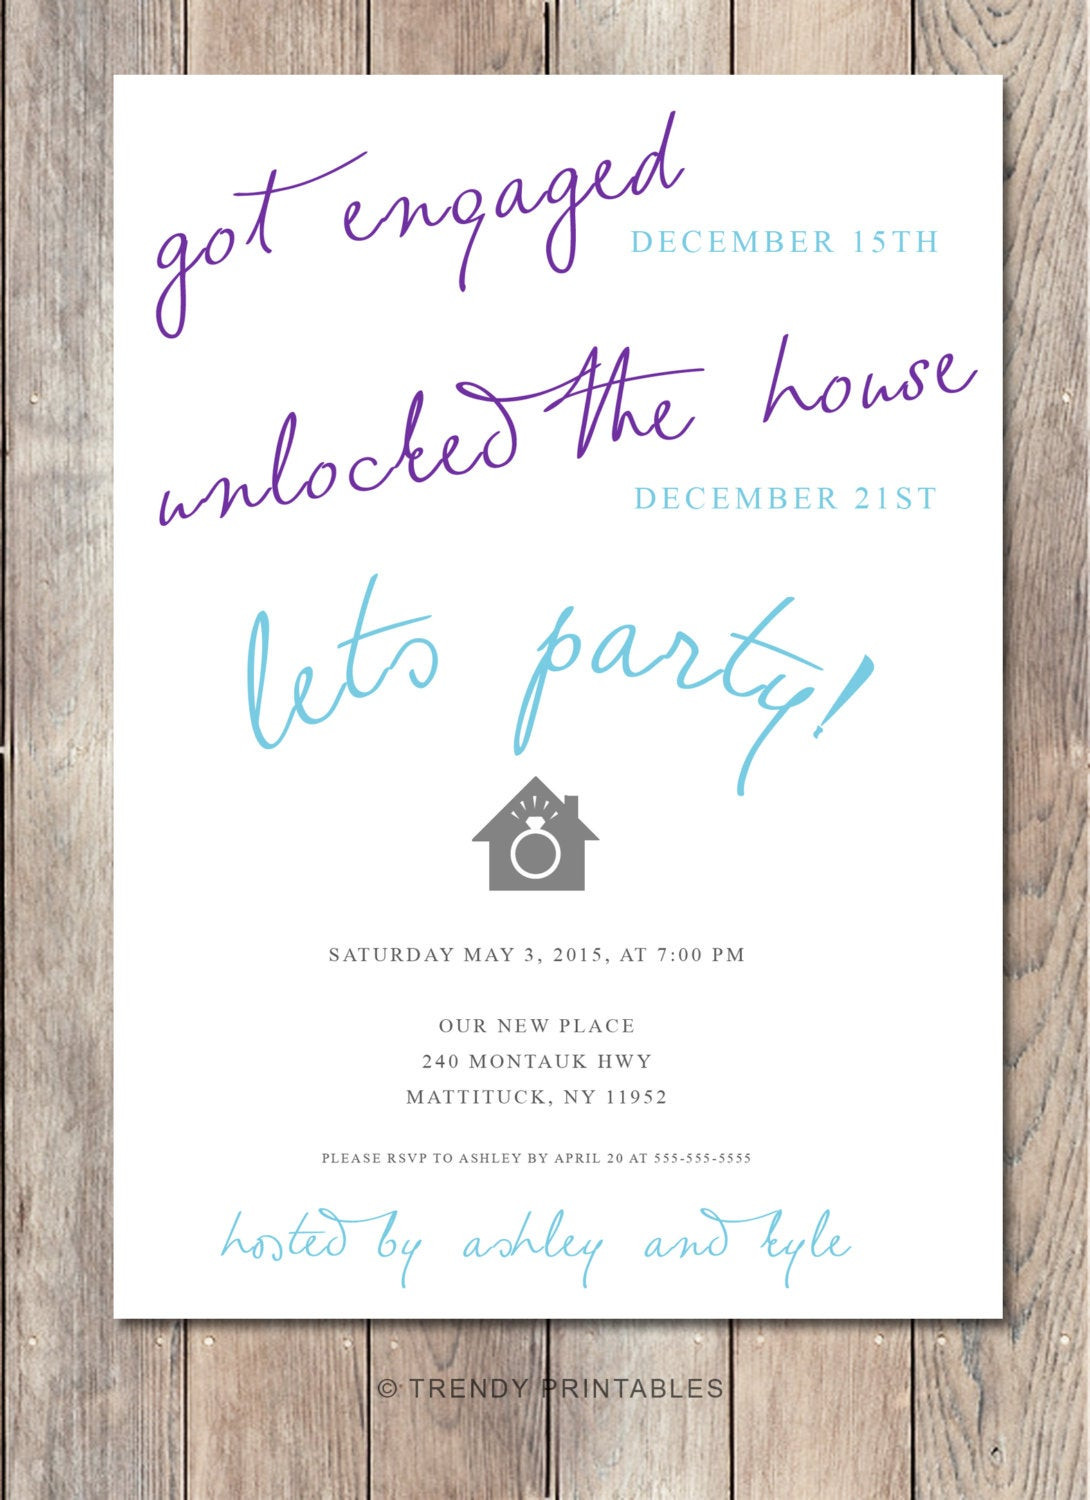 Engagement Party Invites Ideas
 Engagement Party Invitation Housewarming Party by